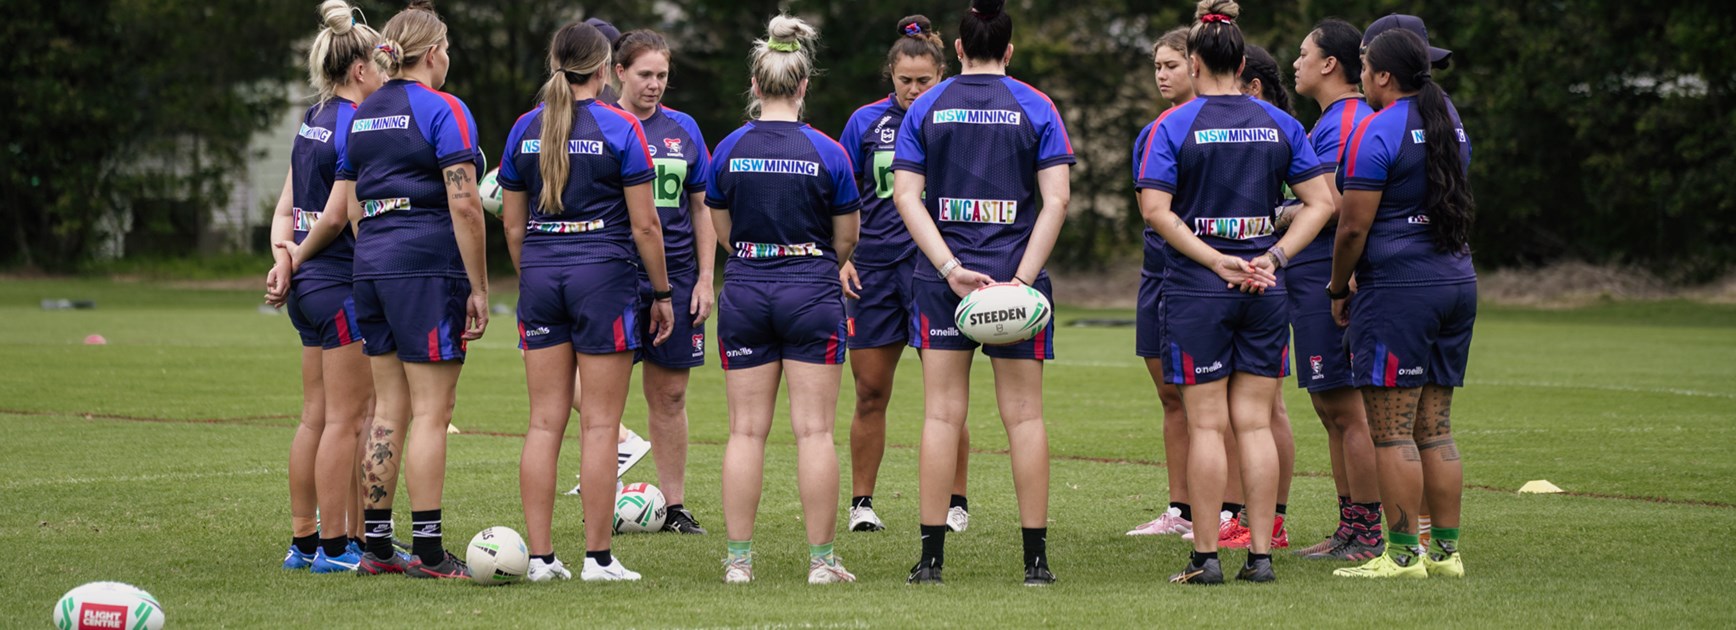 Nominations for Harvey Norman NSW Women's Premiership team open now